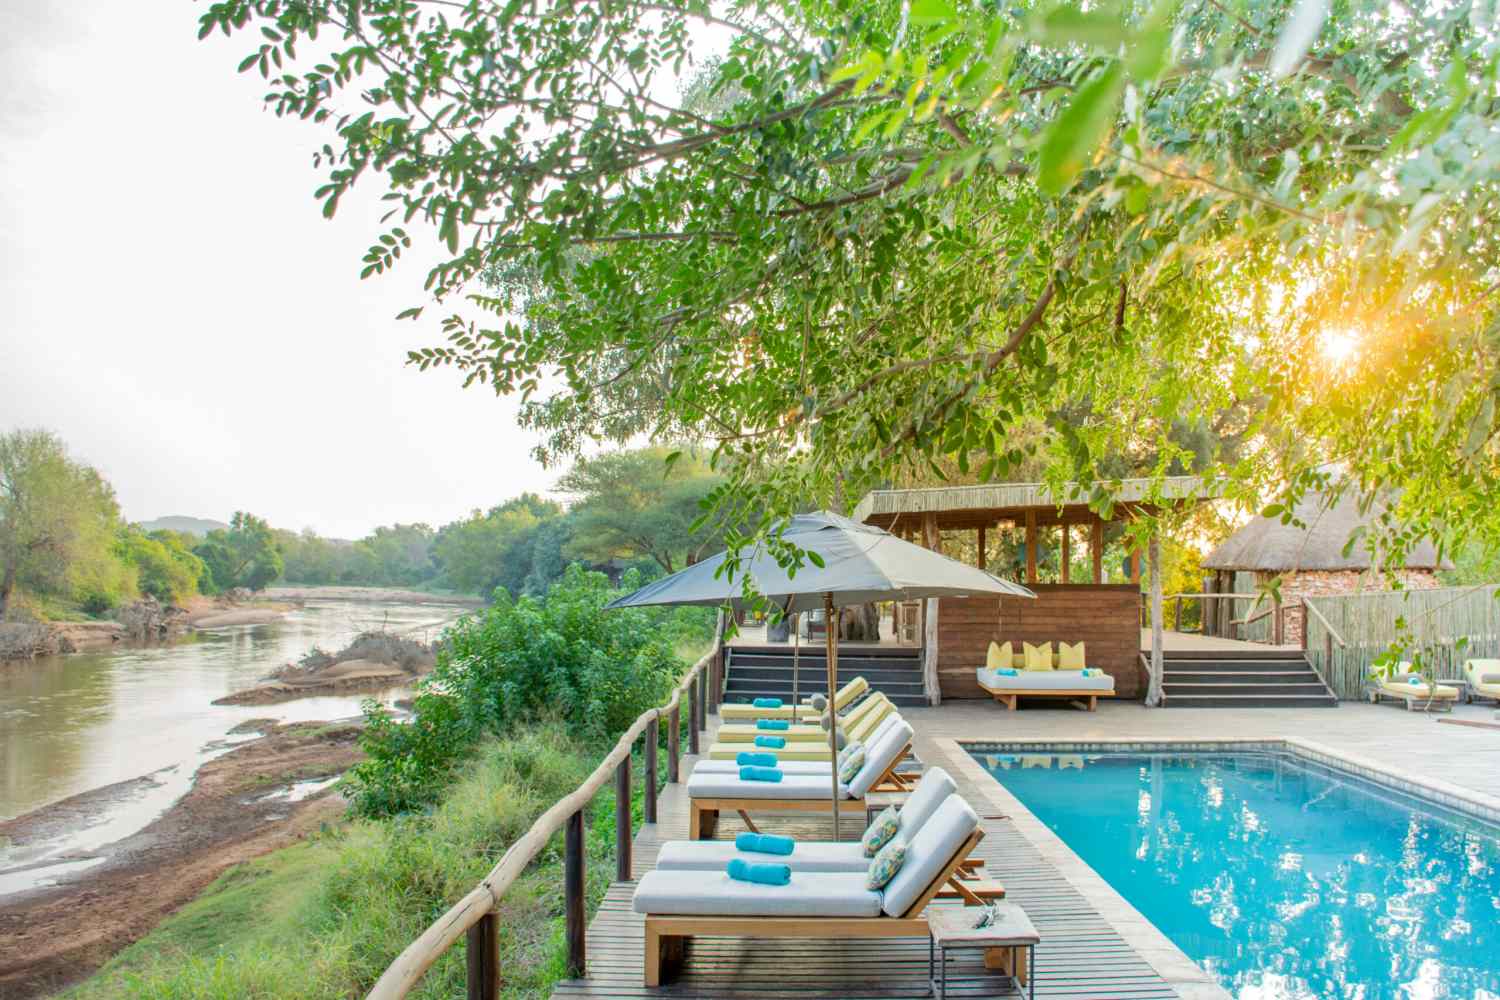 Pafuri Tented Camp, Limpopo - South Africa